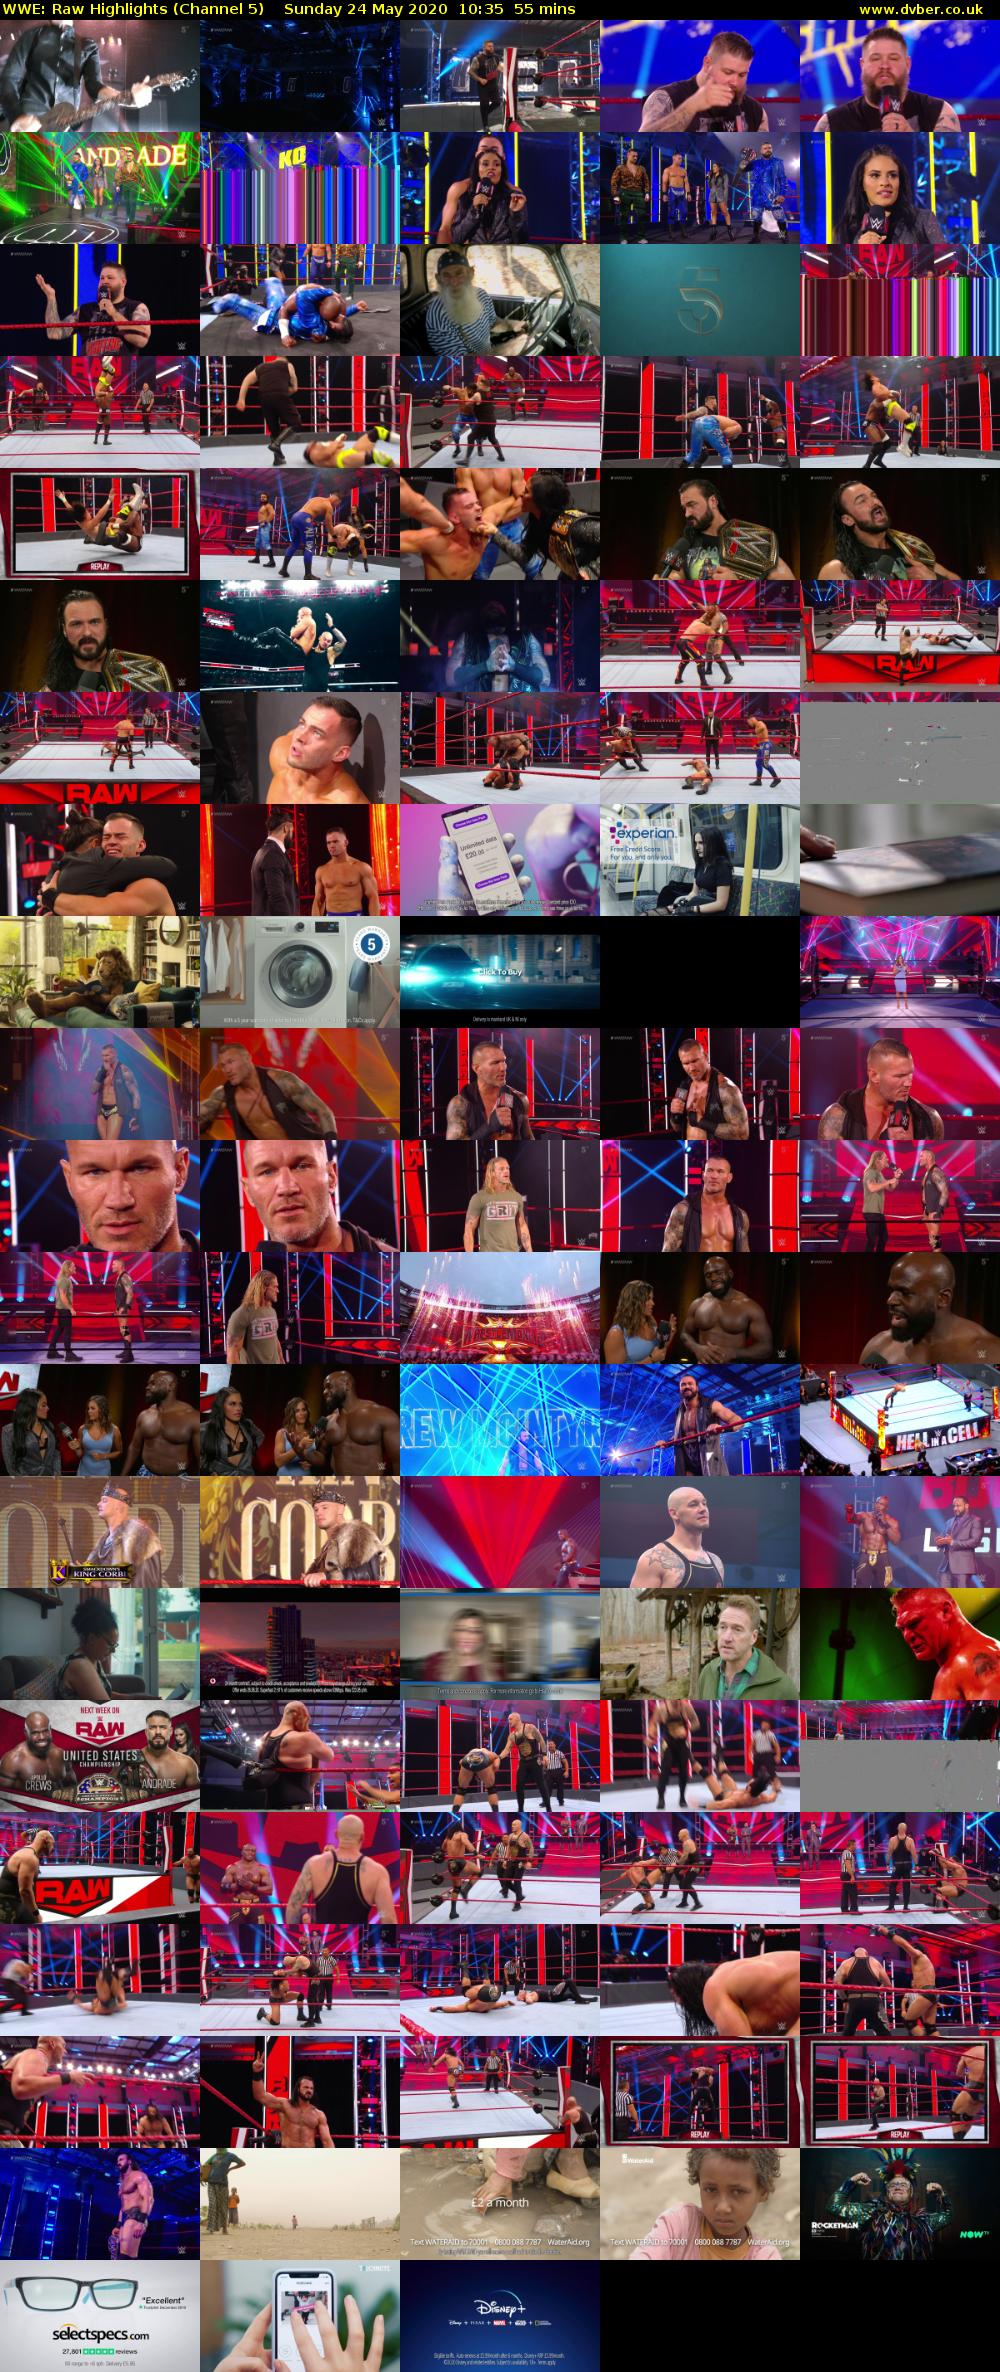 WWE: Raw Highlights (Channel 5) Sunday 24 May 2020 10:35 - 11:30